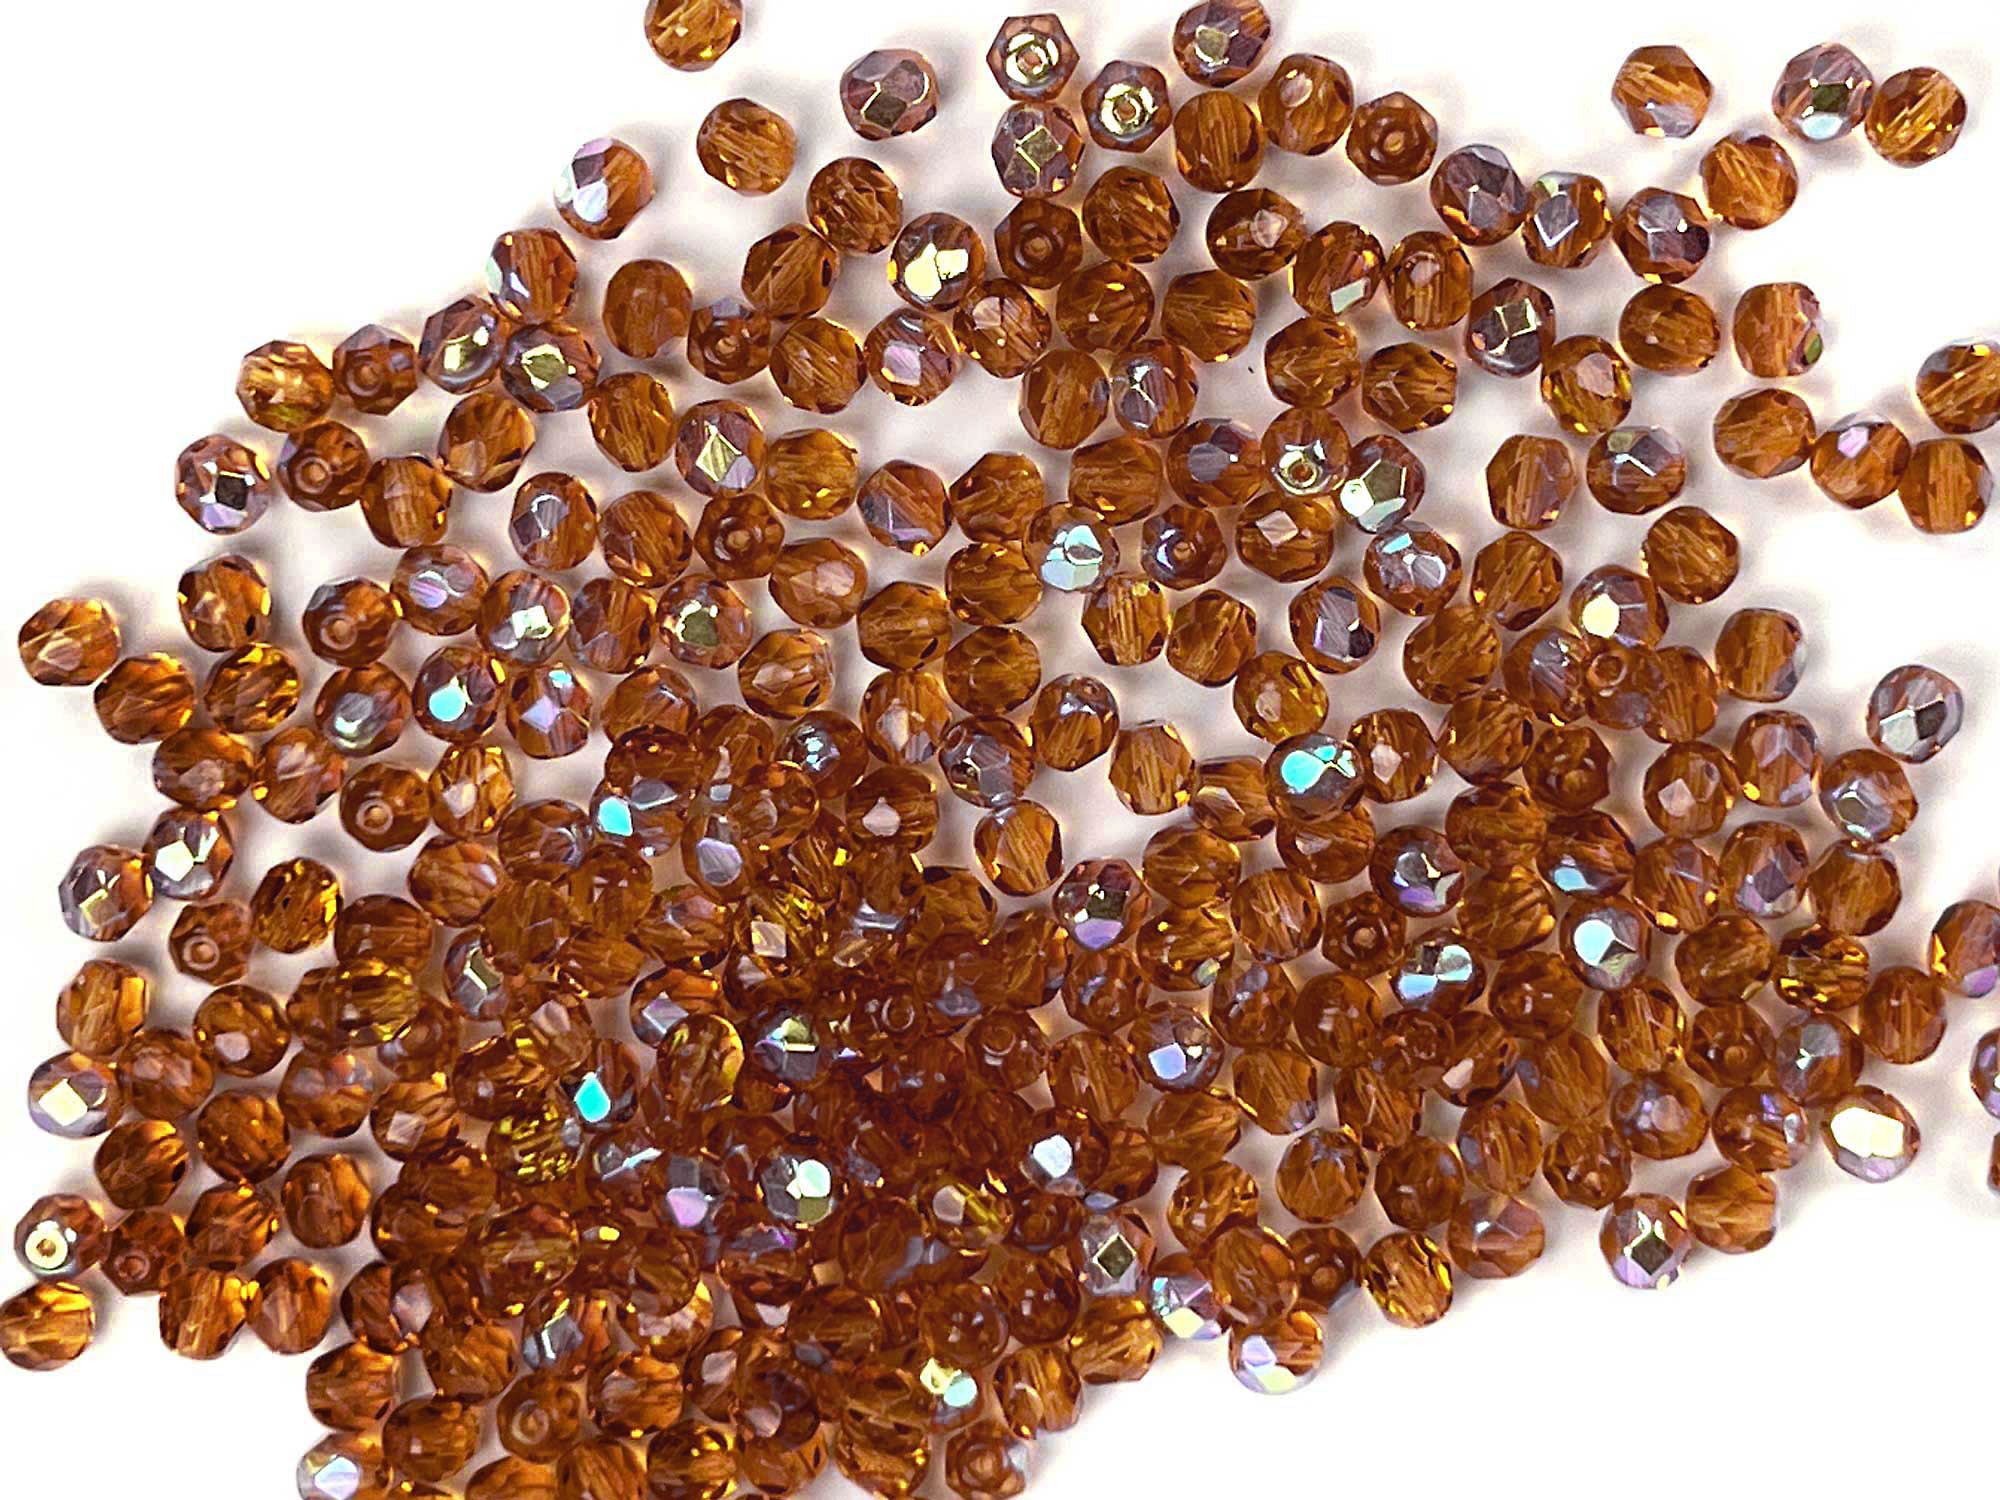 Medium Topaz AB coated, Czech Fire Polished Round Faceted Glass Beads, 16 inch strands, medium brown with Aurora Borealis coating, 3mm, 4mm, 6mm, 8mm